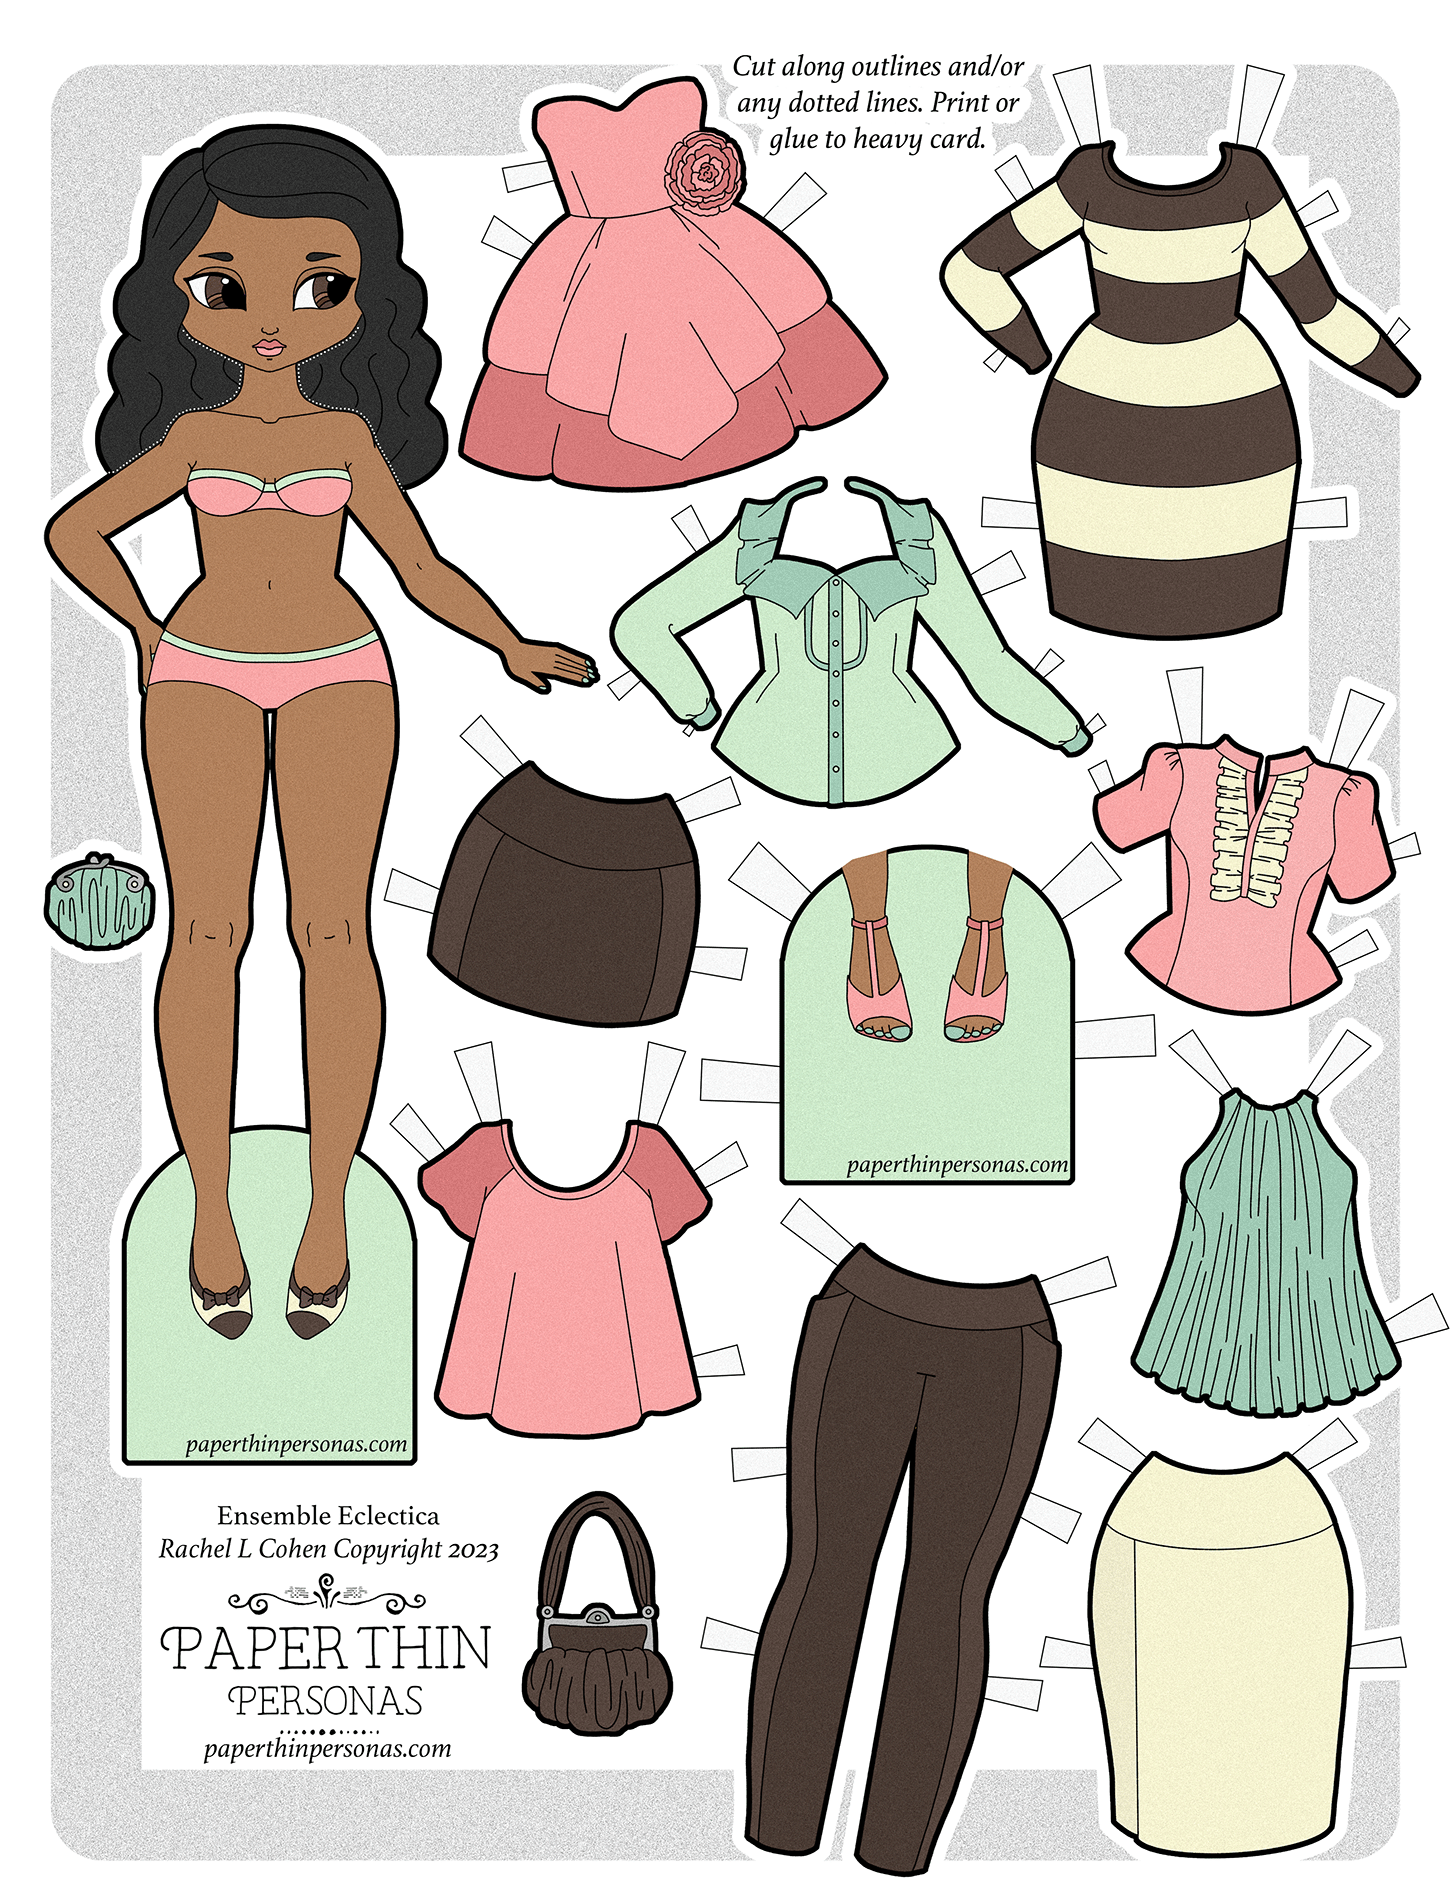 https://paperthinpersonas.com/wp-content/uploads/2023/09/coffee-paper-doll-eclectica-color-thumb.png